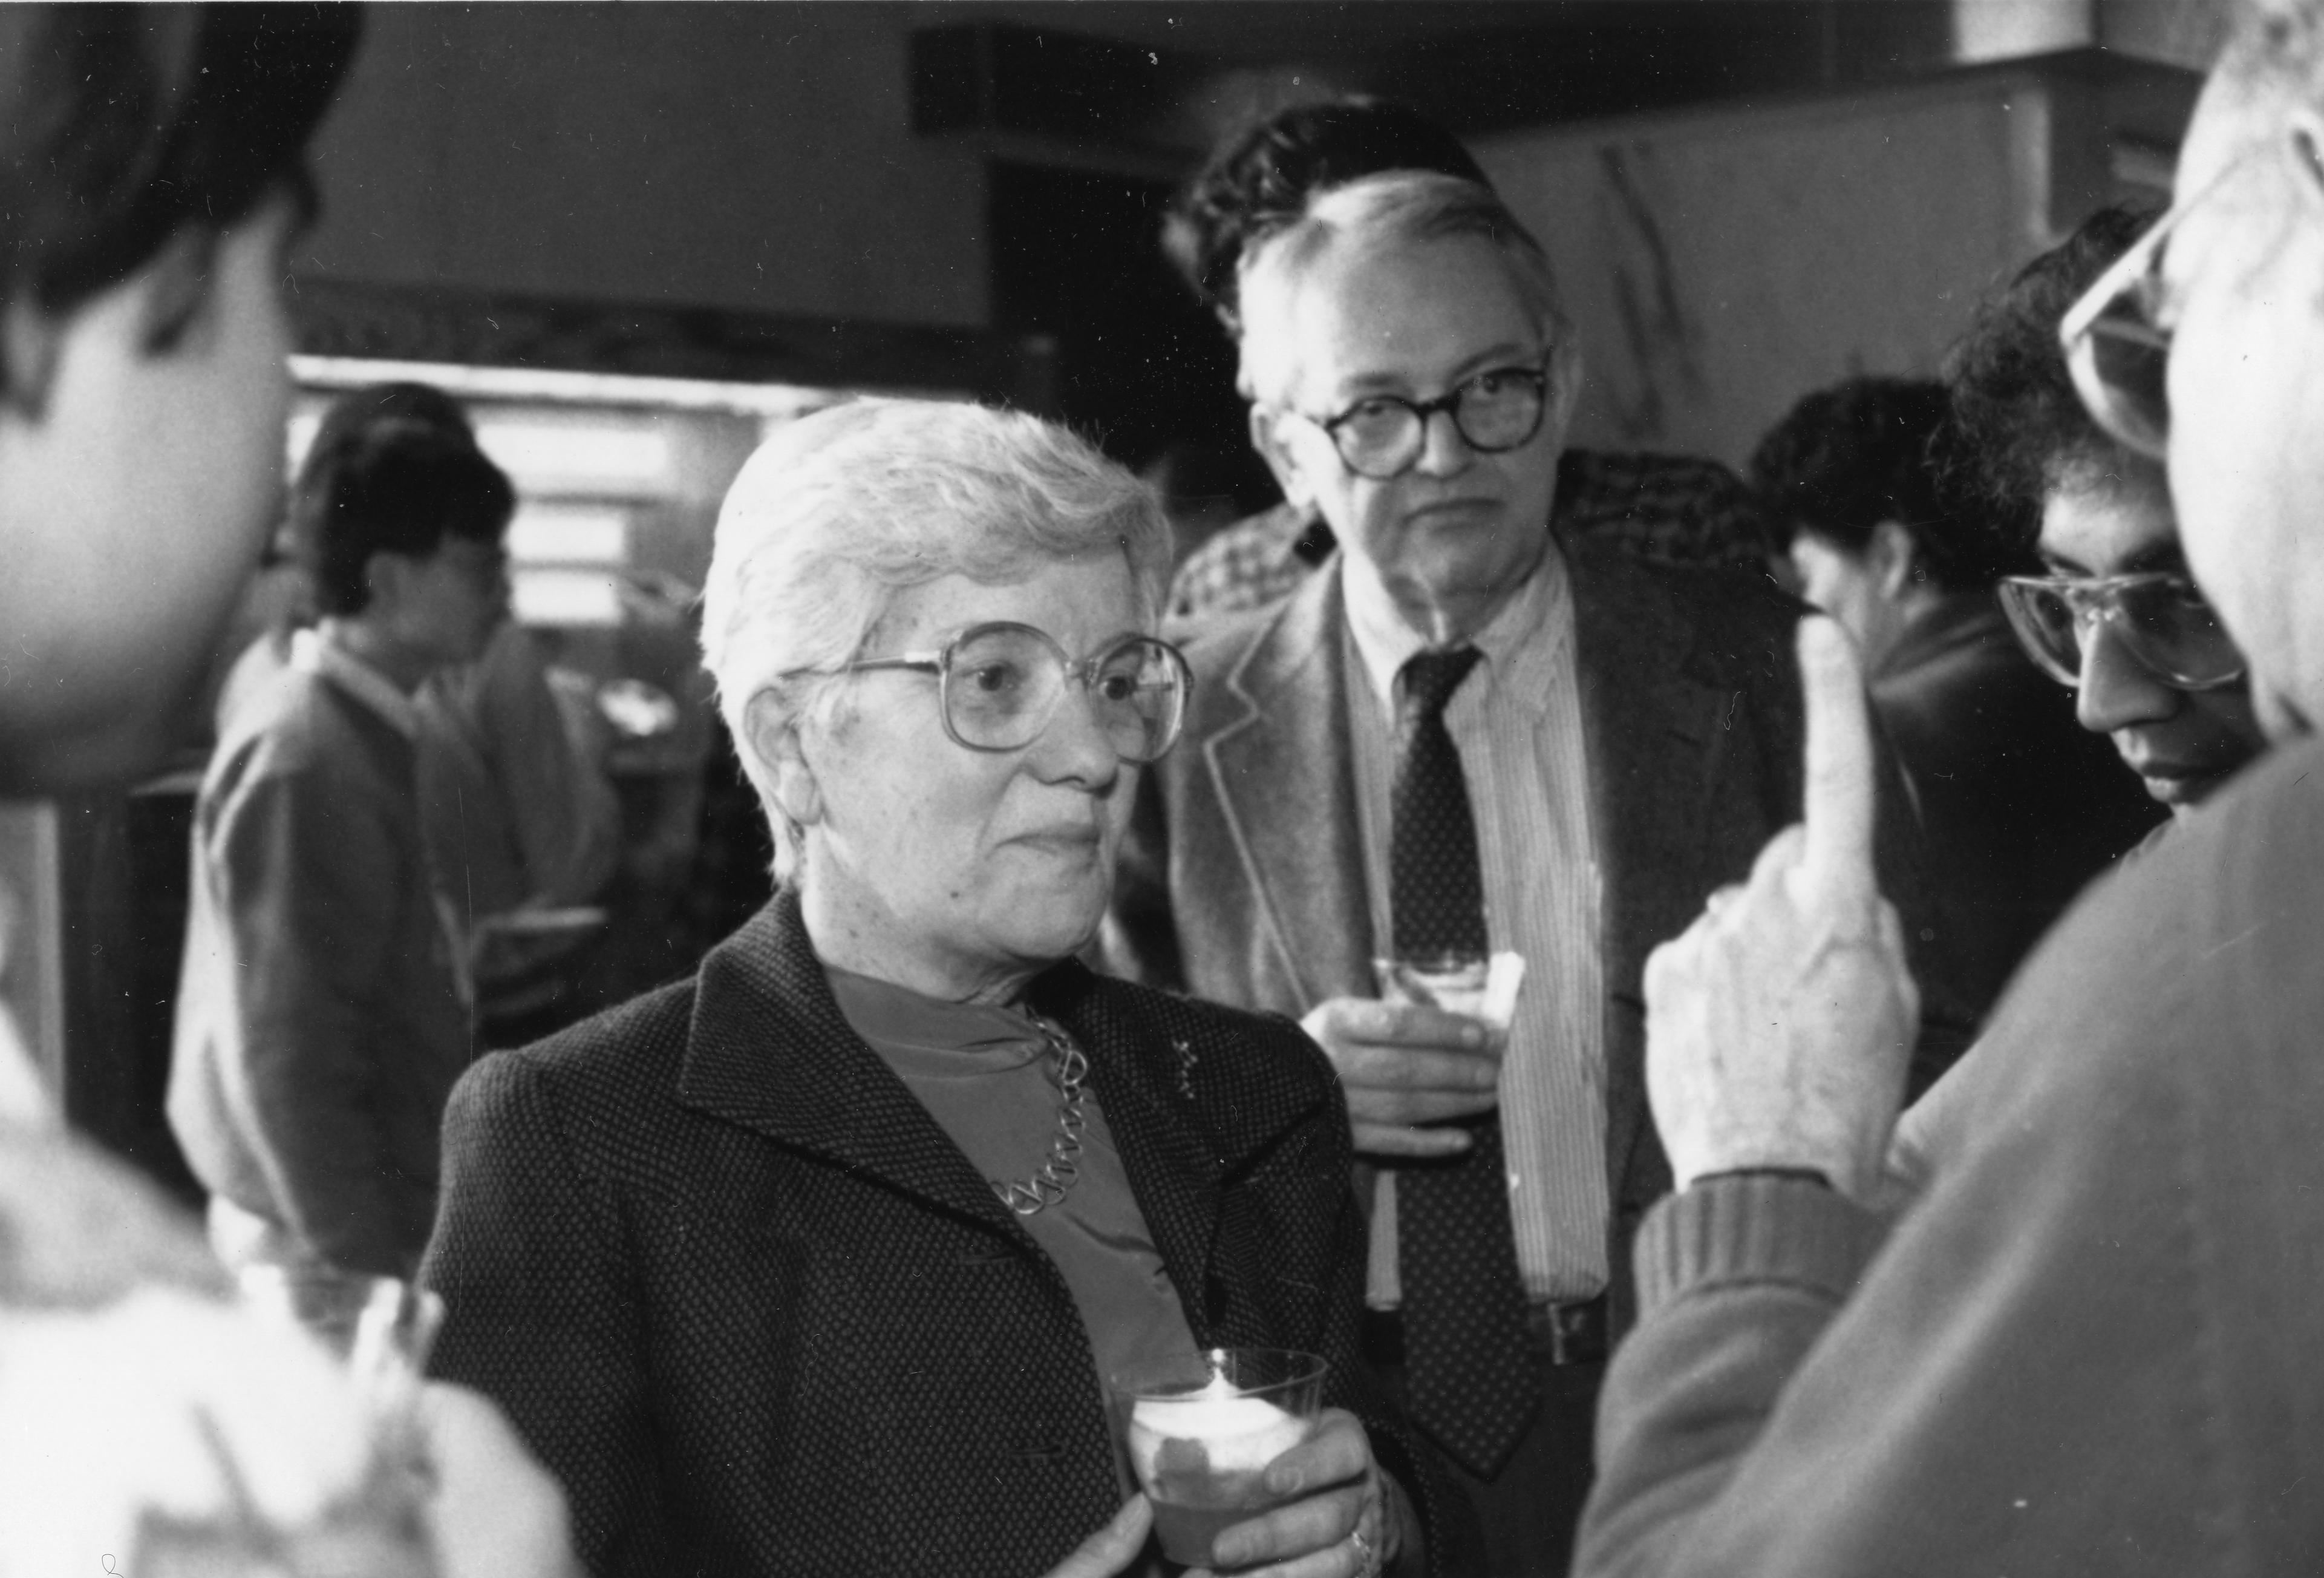 Vera Rubin (center) converses at the 'Dark Matter, Large Scale Motion, and other Mysteries of the Universe' session at the University of Illinois Urbana-Champaign. Image: Rubin Vera C7, Department of Phyiscs, University of Illinois at Urbana-Champaign